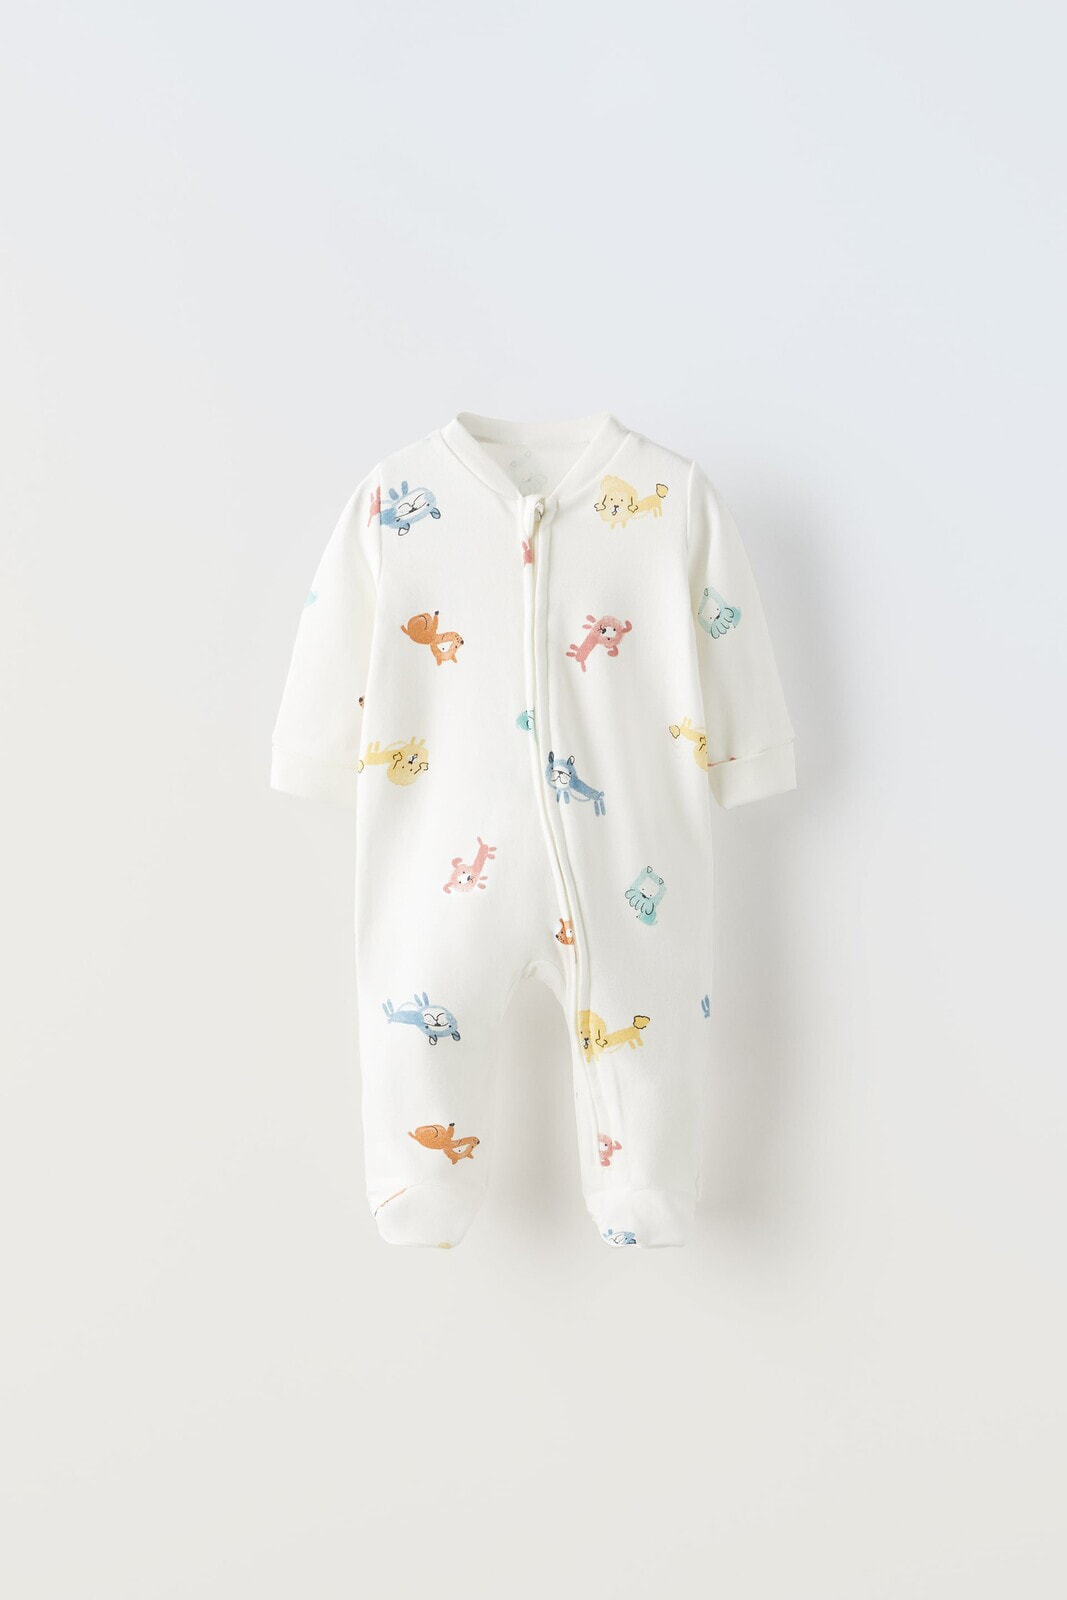 0-18 months/ sleepsuit with puppies